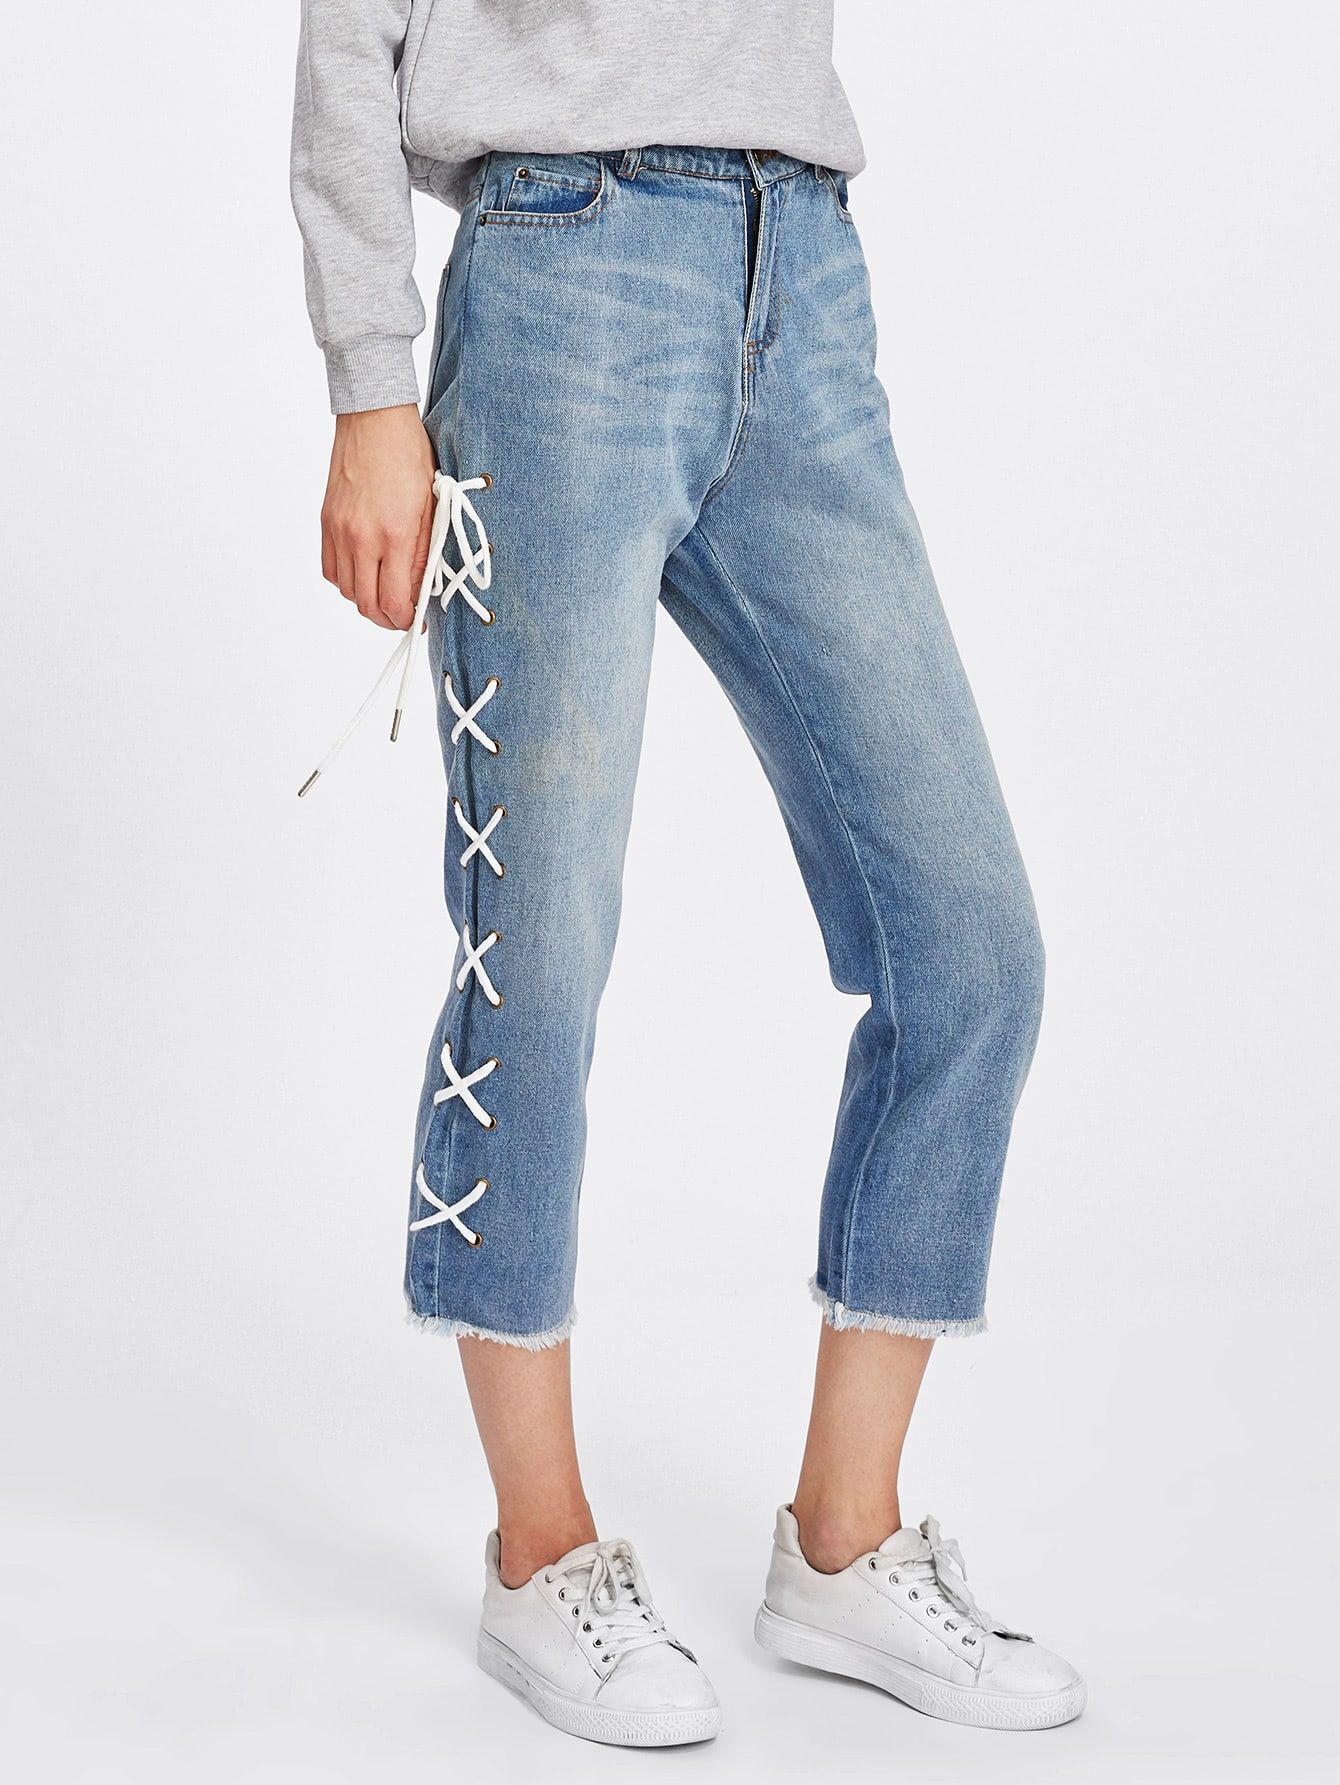 Frayed Edge Lace Up Crop Jeans | SHEIN